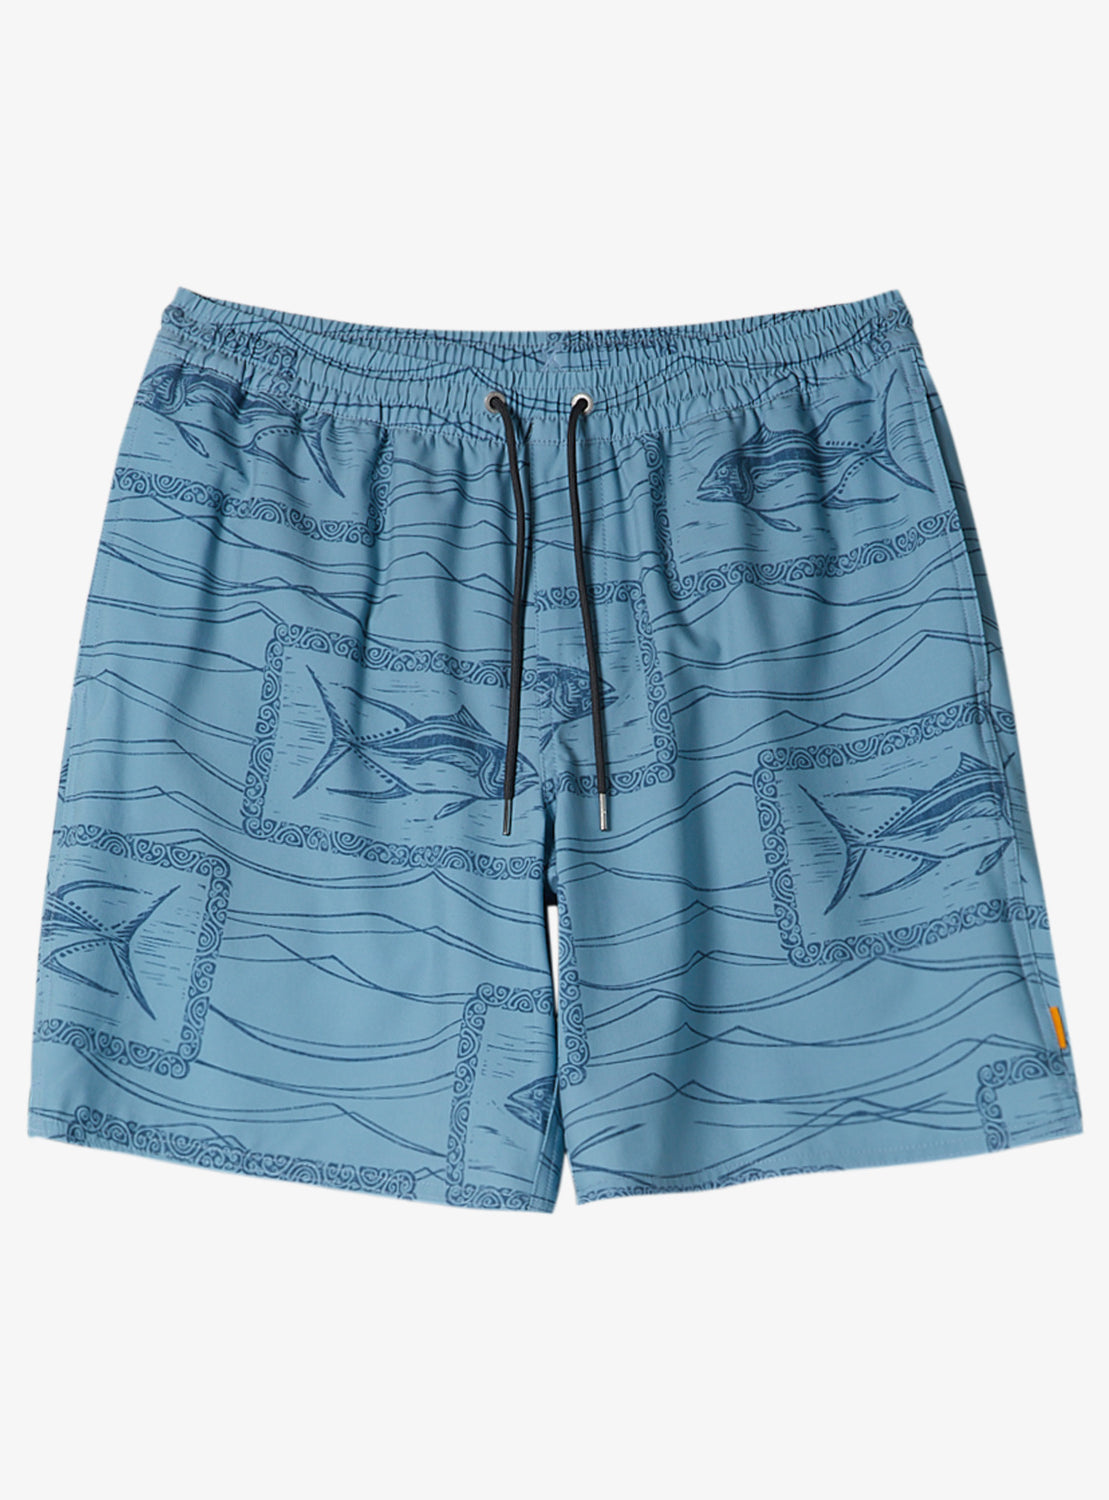 Quiksilver: Waterman Reef Point 17" Volley Shorts